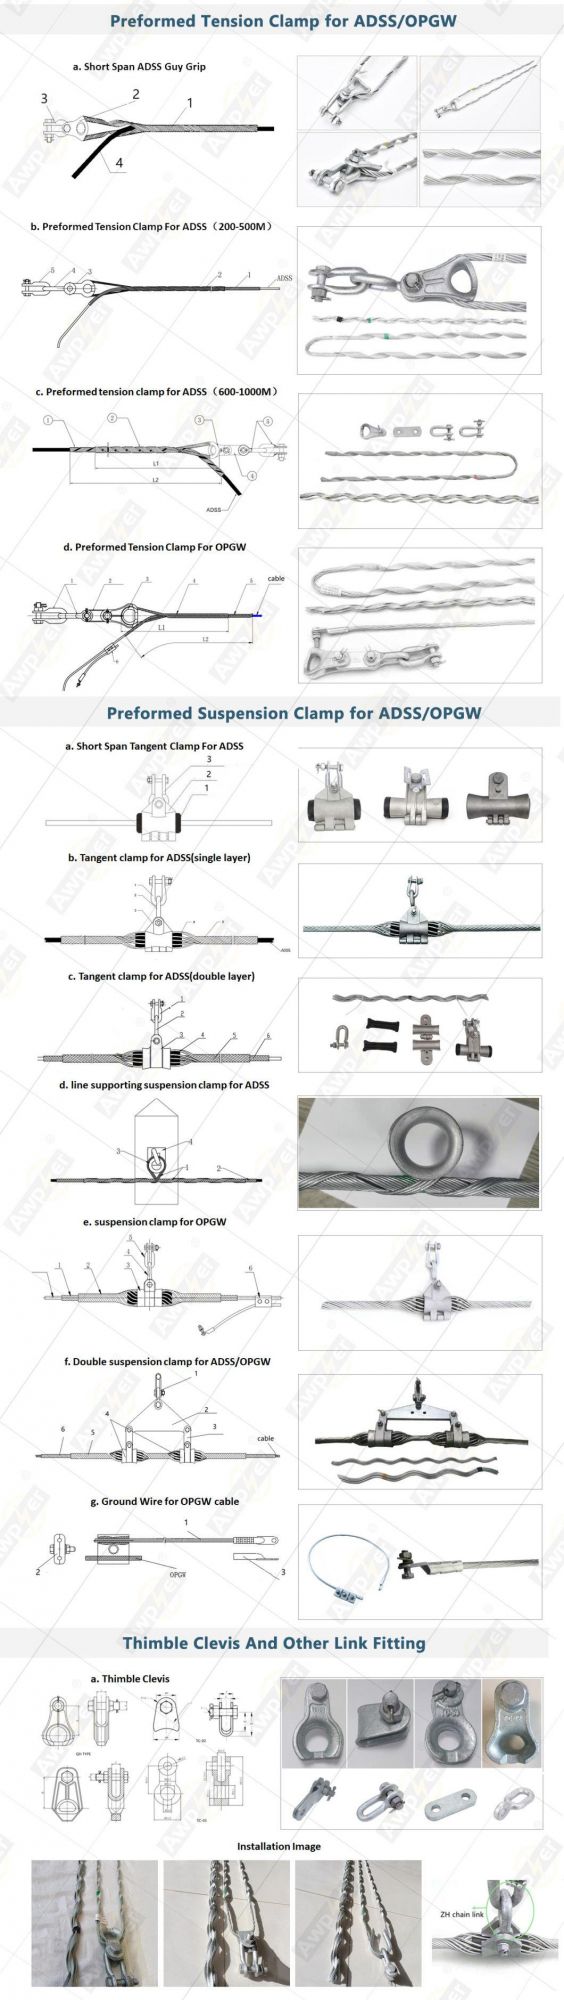 ADSS Suspension Clamp Preformed Dead End Tension Clamp for Outdoor Aerial Transmission Line Cable Accessories